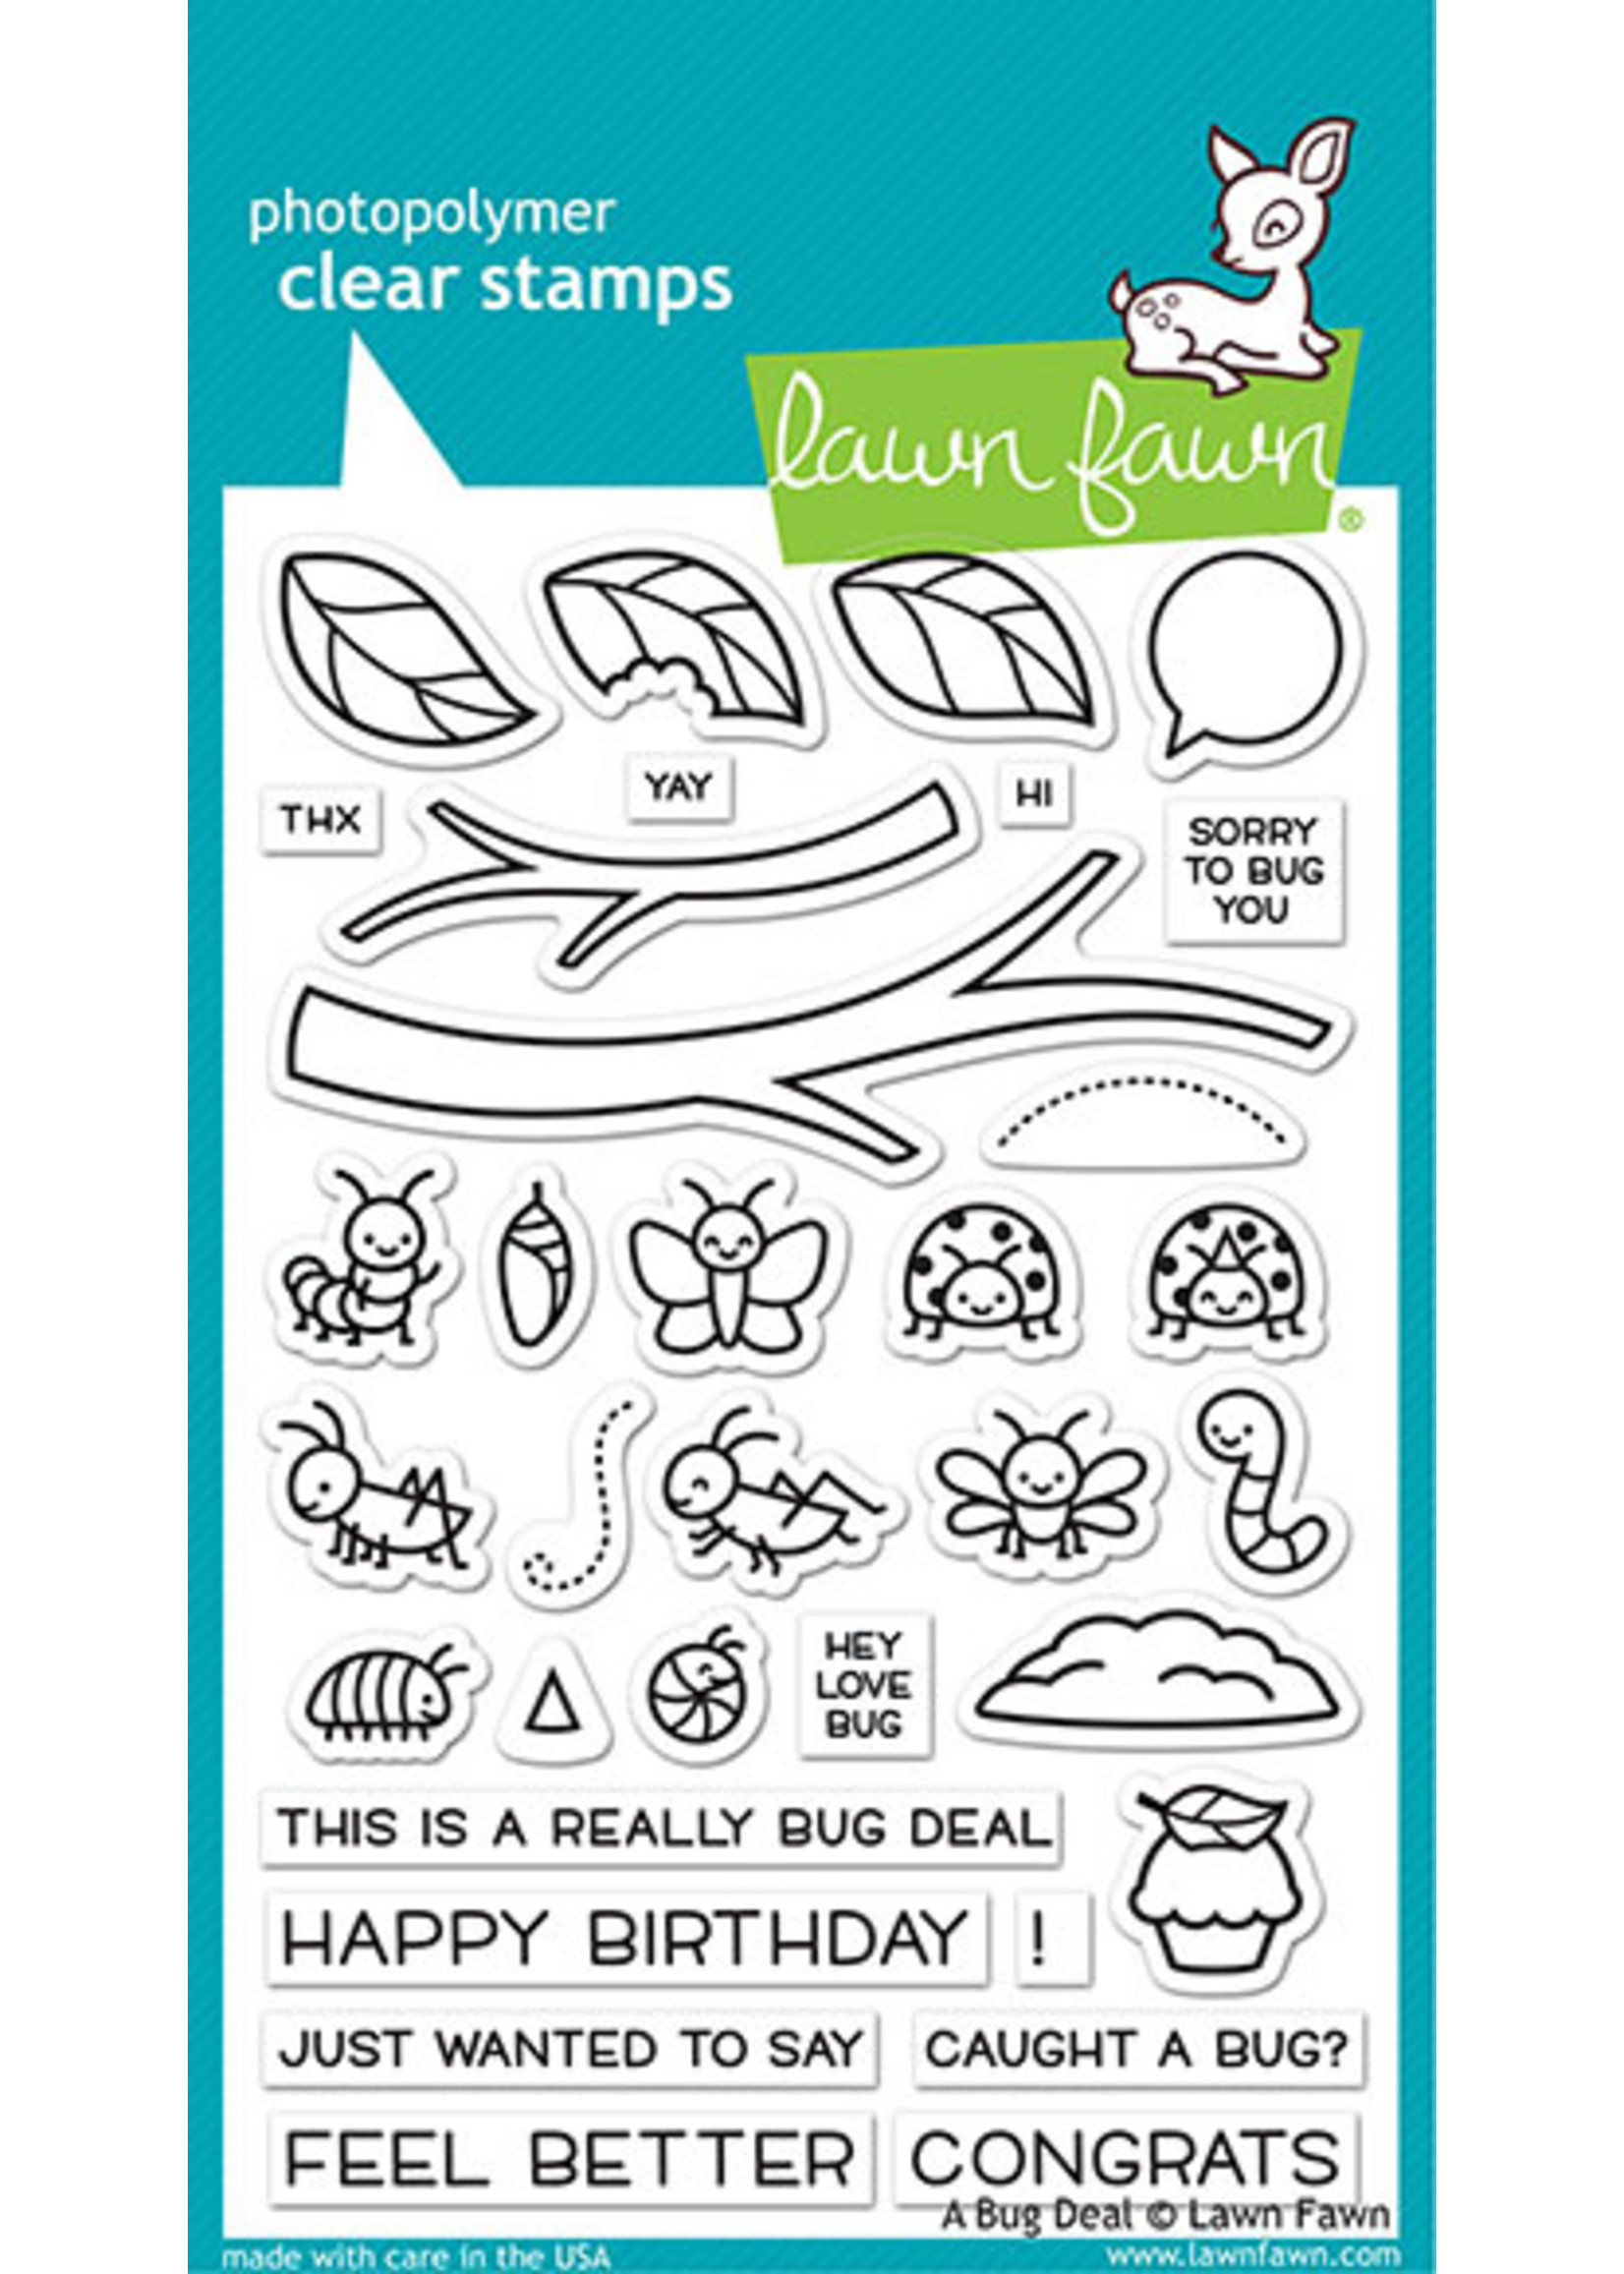 Lawn Fawn Stamp a bug deal